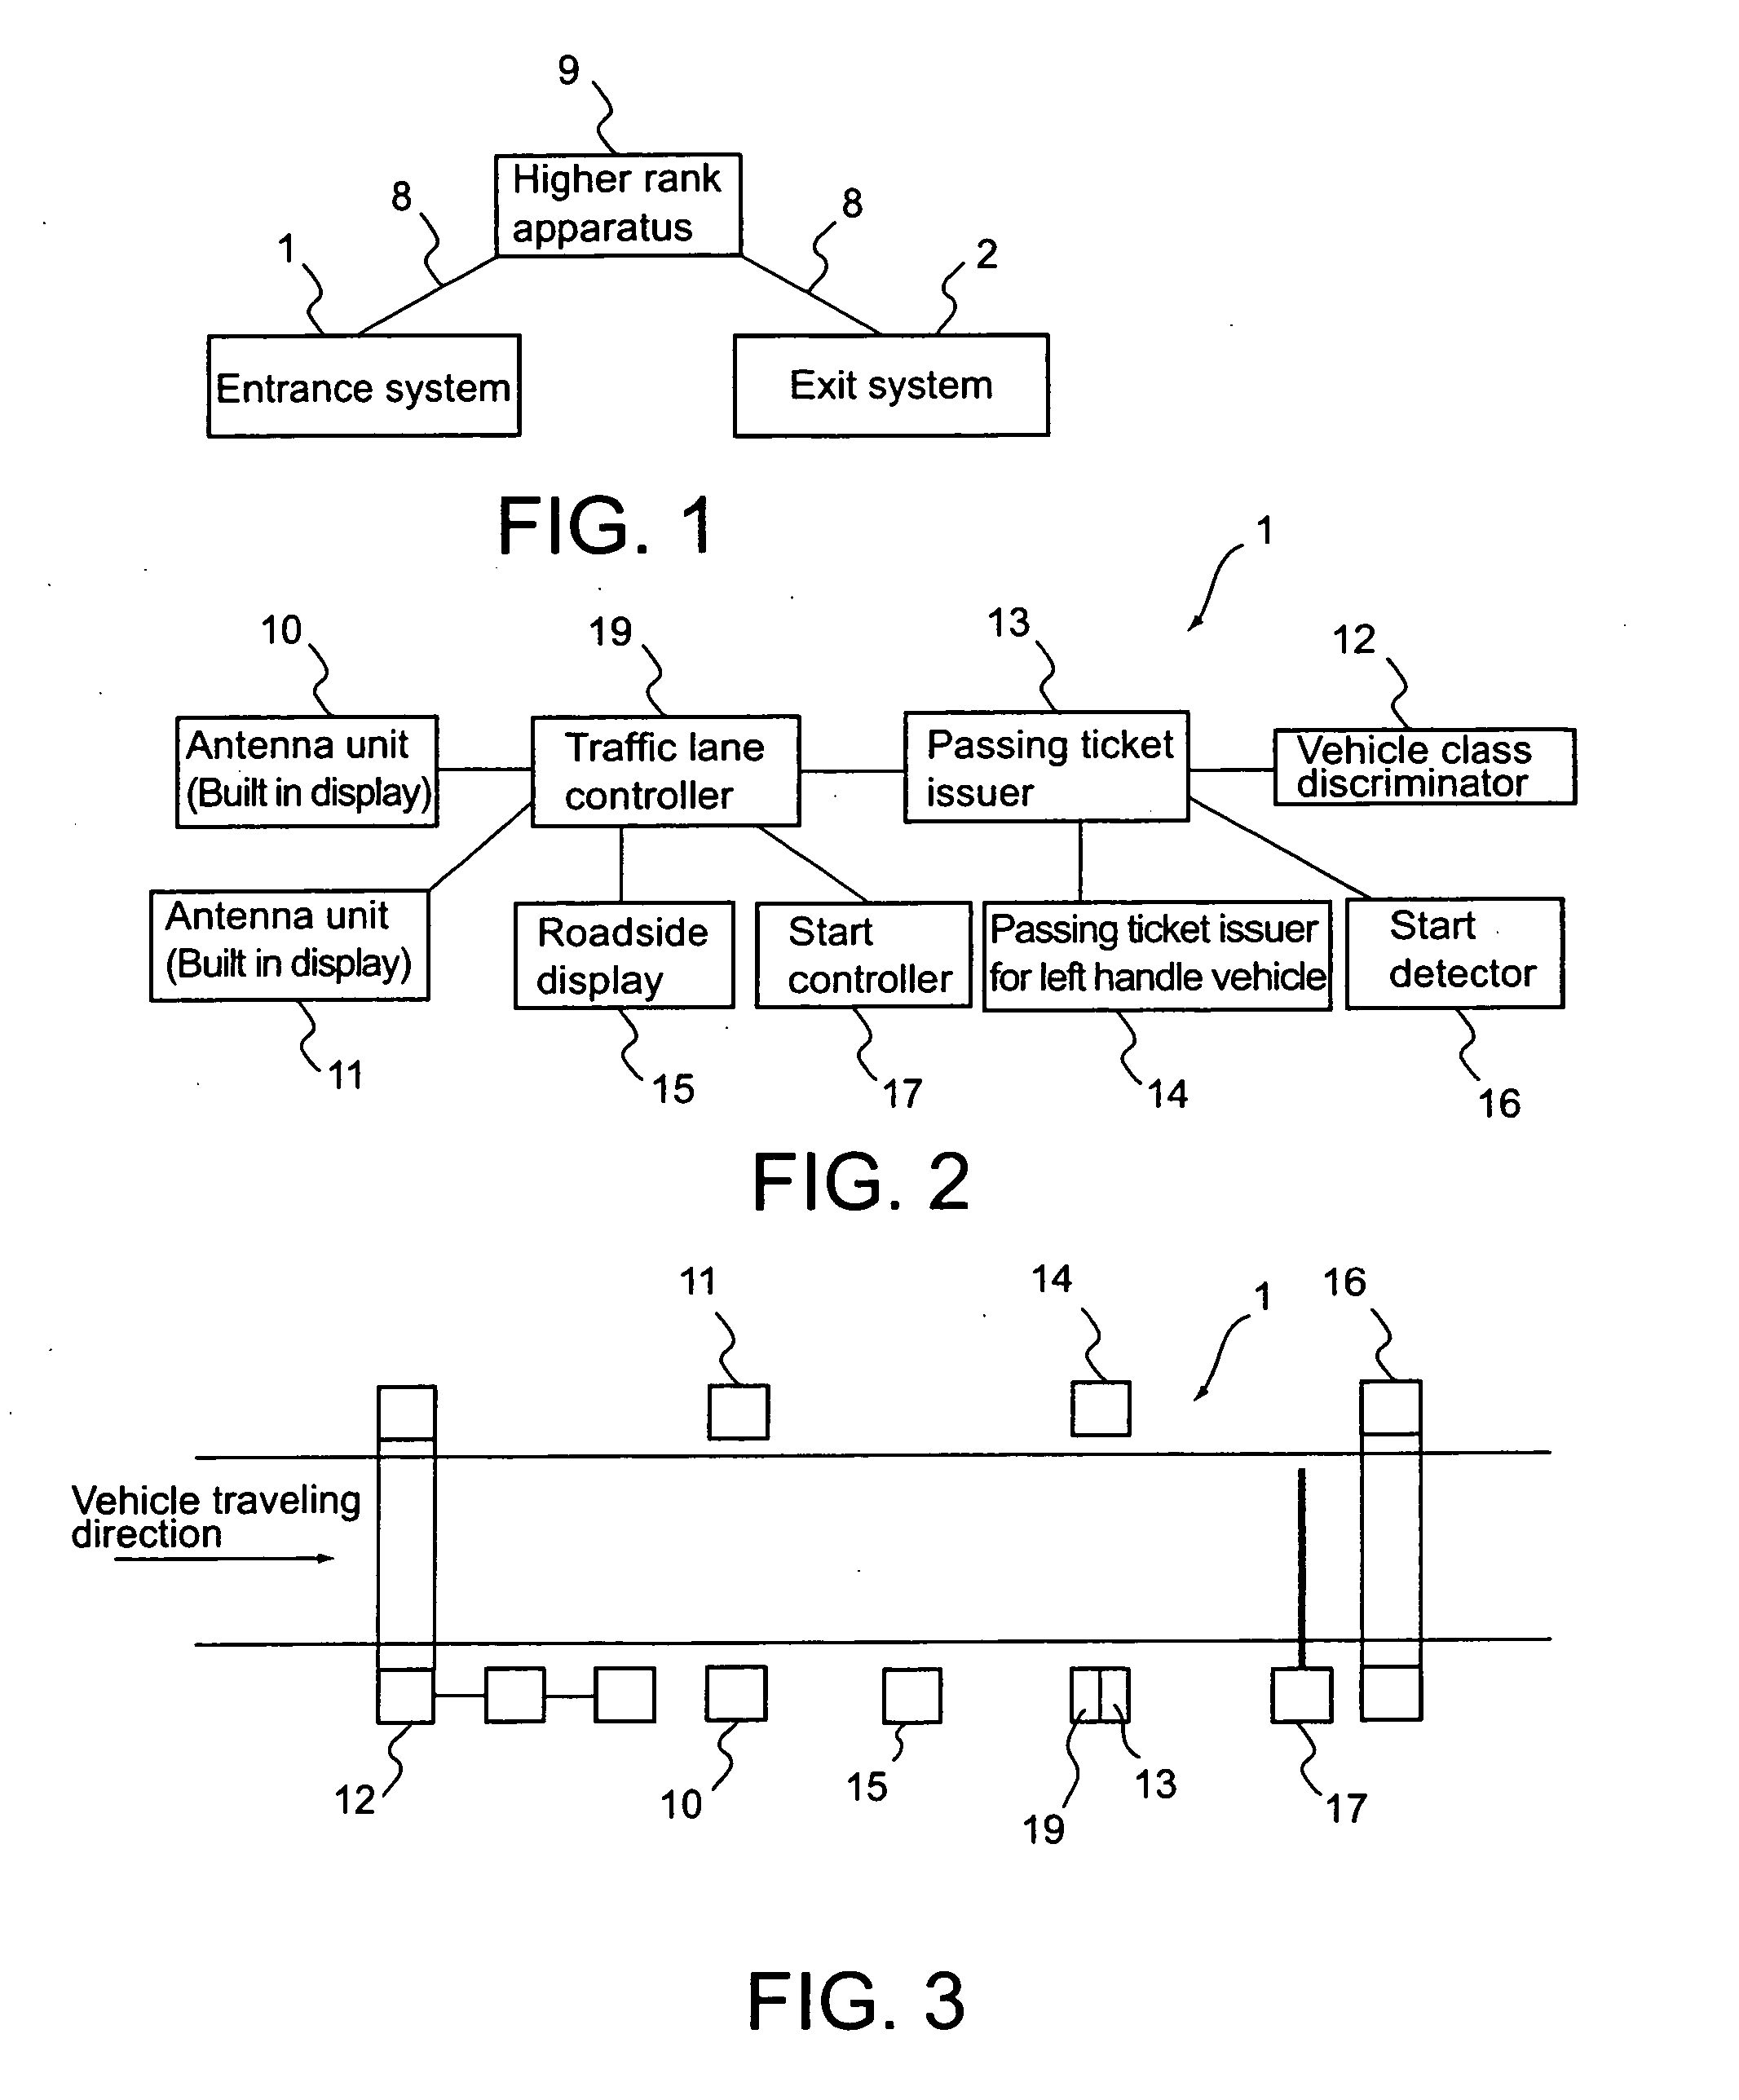 Card processing system and card processing method on toll road